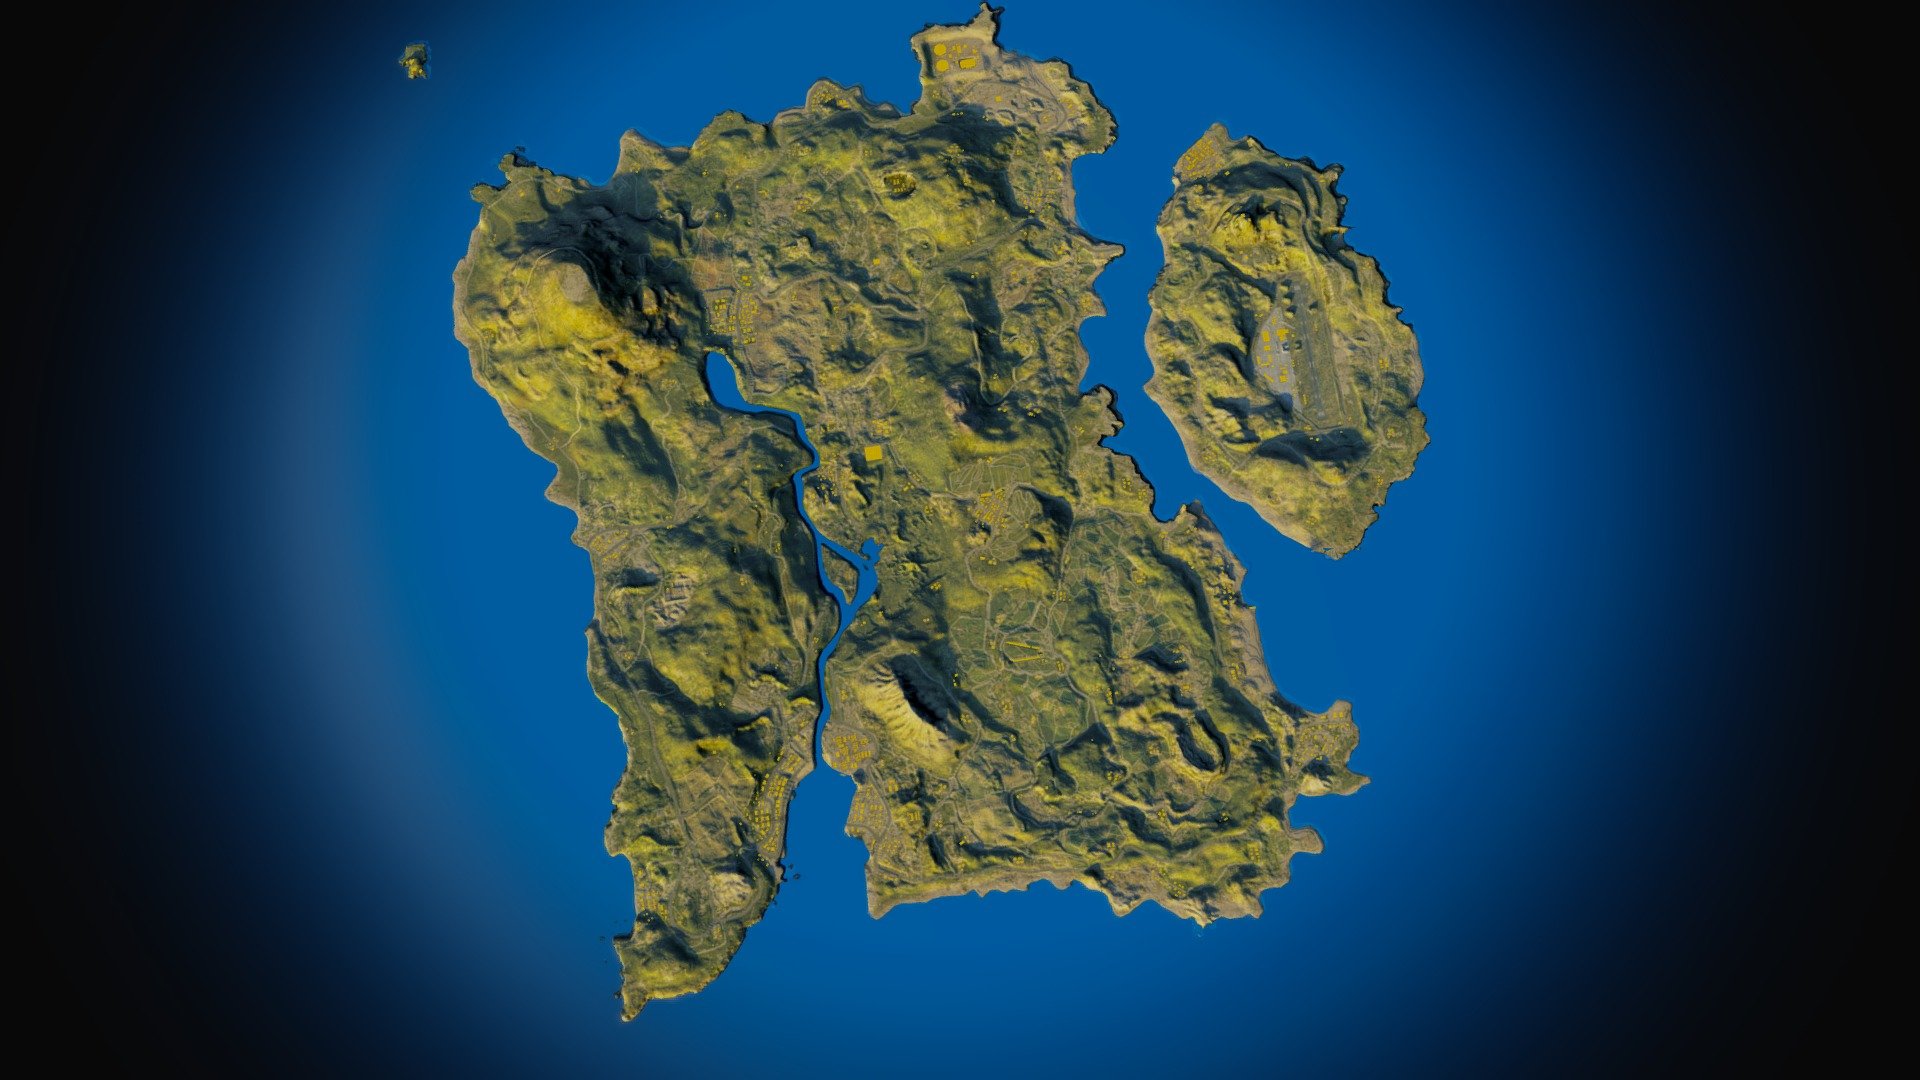 Texture and height map get from https://github.com/cgcostume/pubg-maps
Buildings created from simple rectangle splines and moved to surface with script http://www.scriptspot.com/3ds-max/scripts/move-to-surface
 - Map PUBG (Erangel) - Download Free 3D model by burunduk 3d model